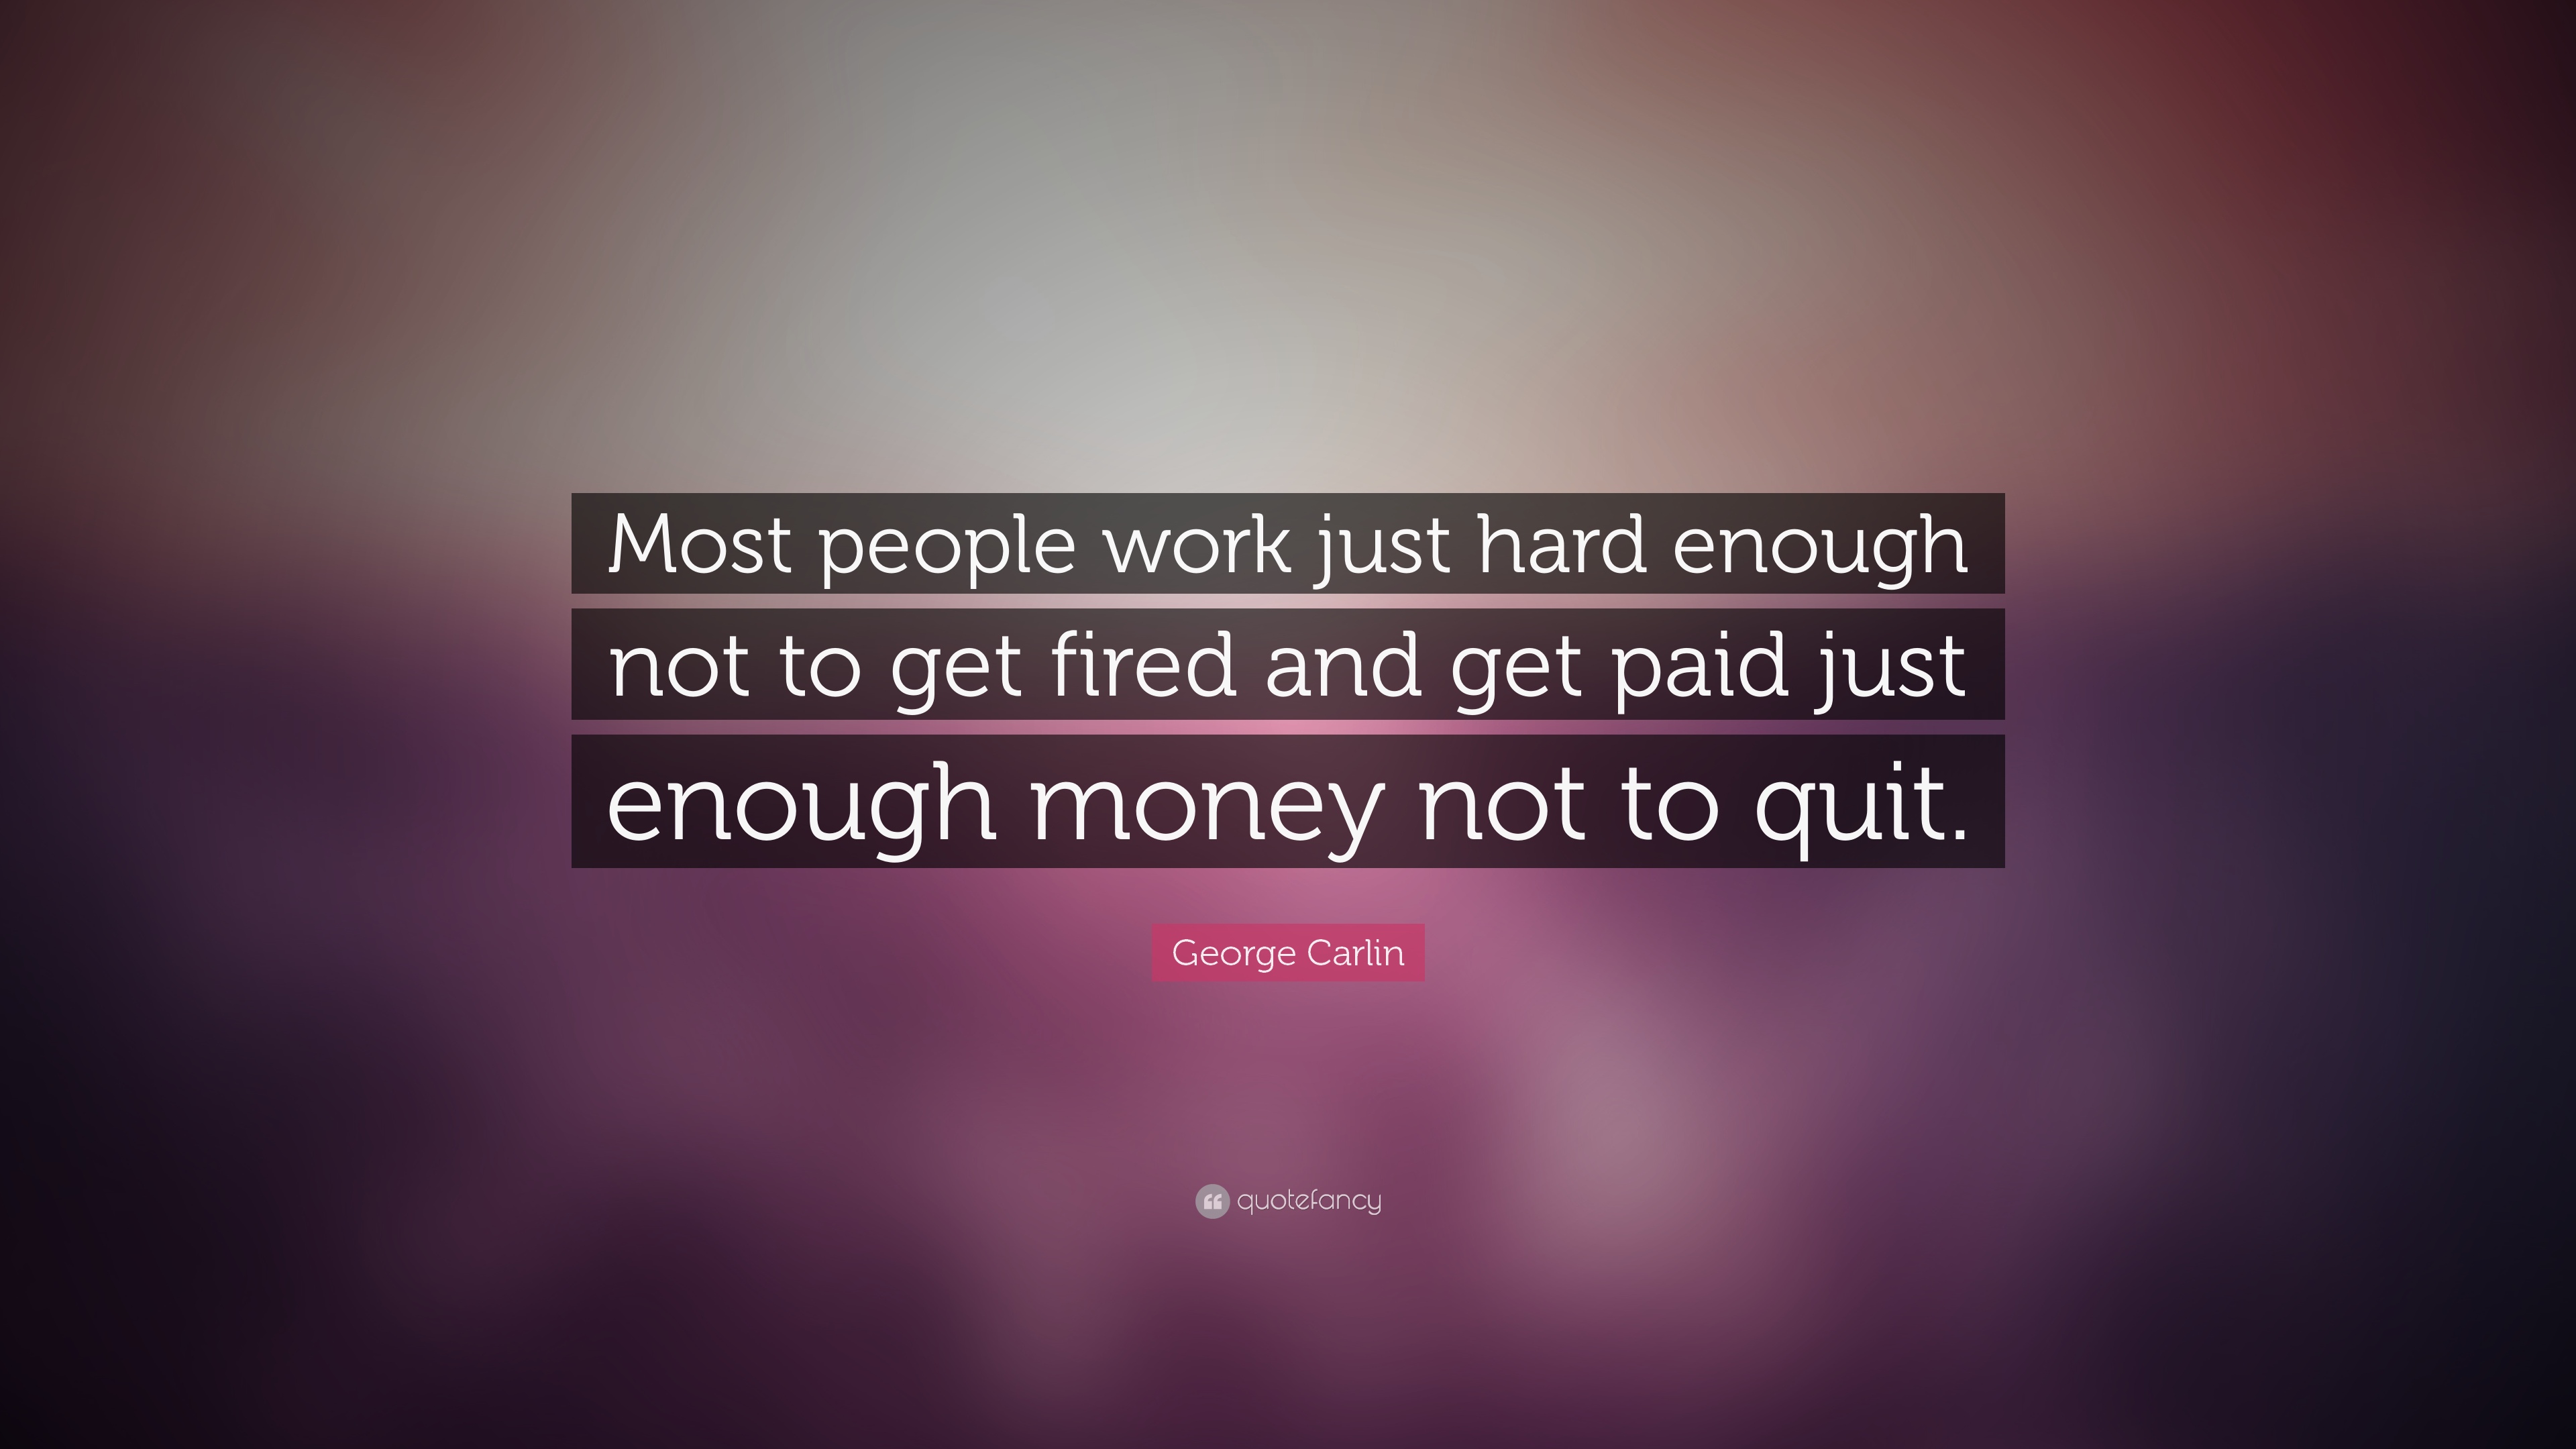 George Carlin Quote: “Most people work just hard enough not to get ...